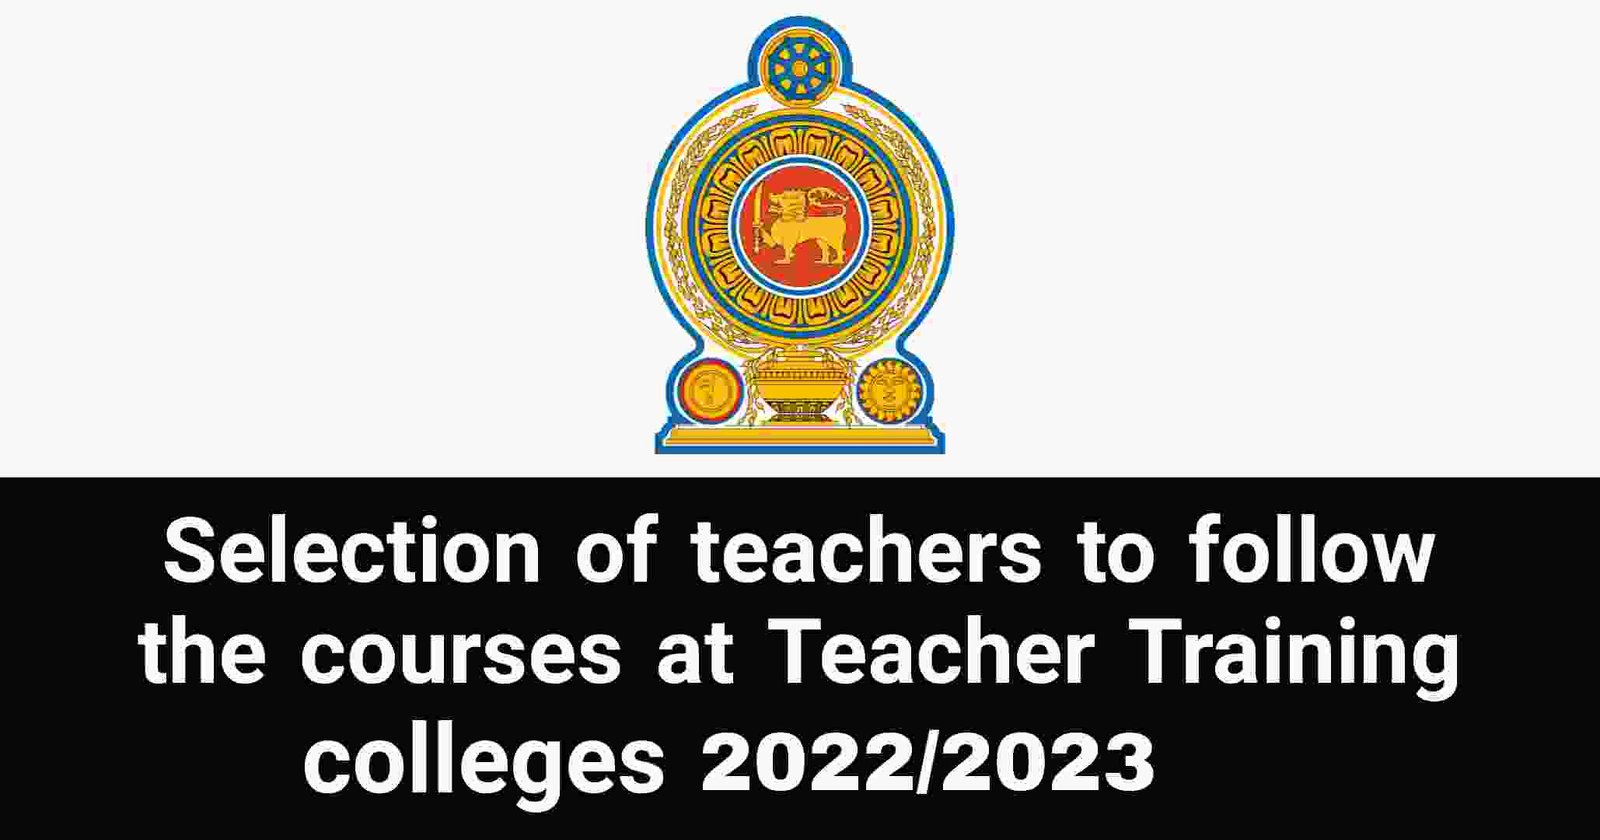 Selection of teachers to follow the courses at Teacher Training colleges 2022/2023 - Ministry of Education